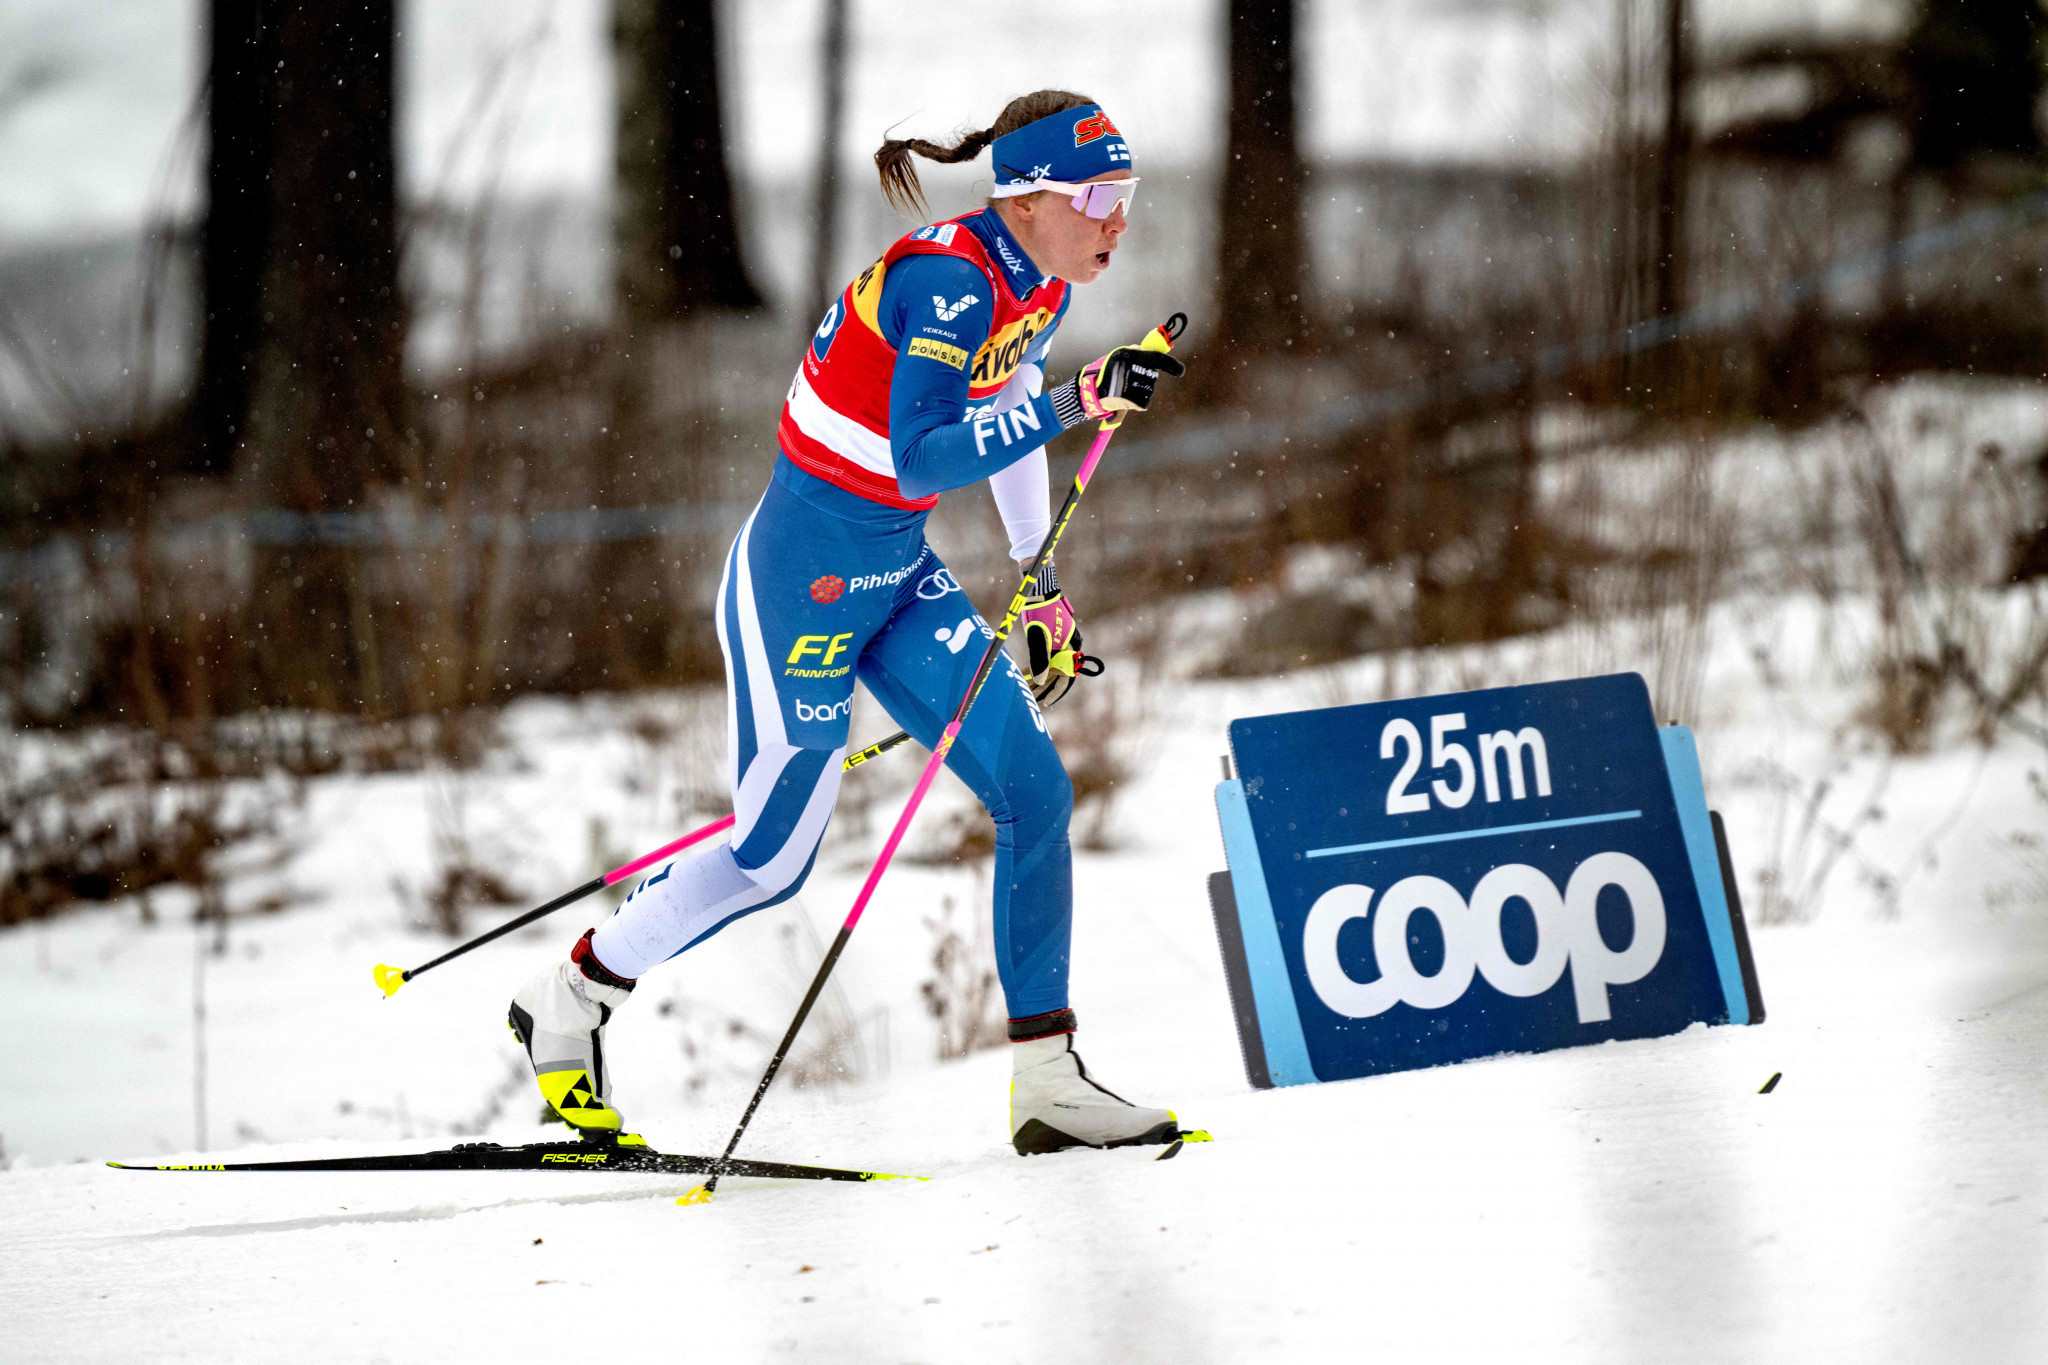 Niskanen wins second distance event at Cross-Country World Cup in Falun